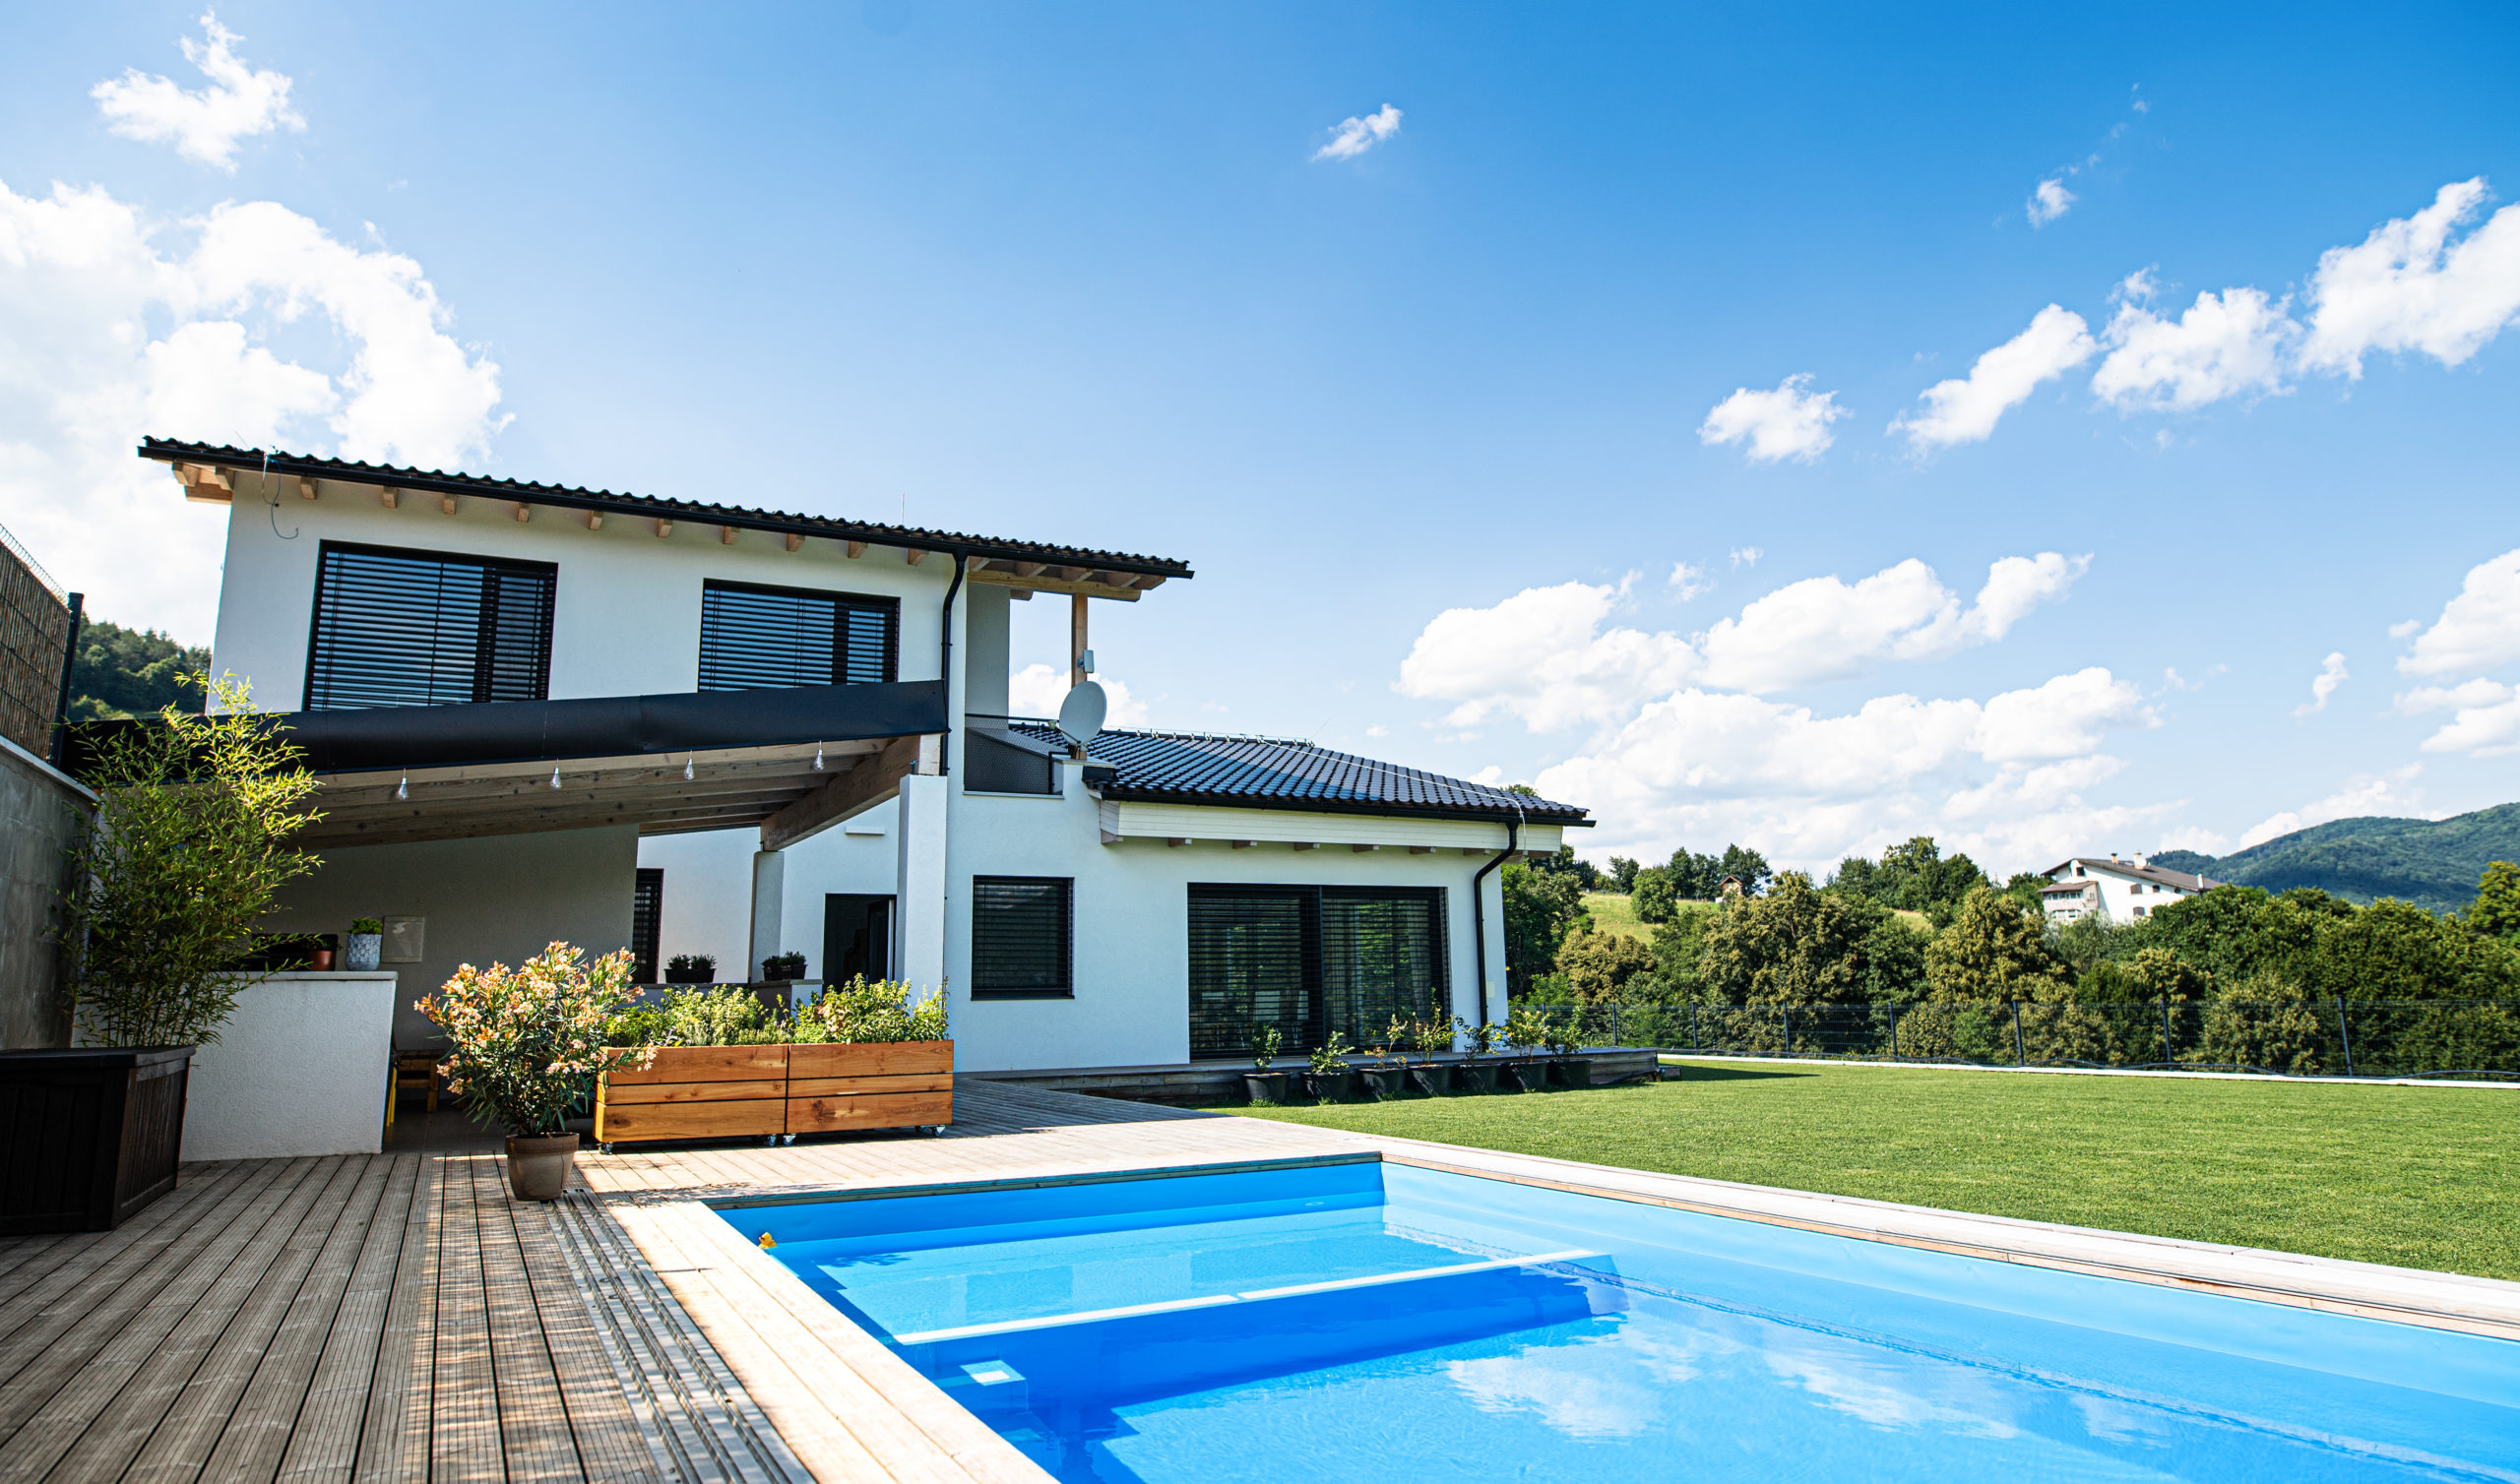 House with swimming pool outdoors in backyard garden in the countryside.